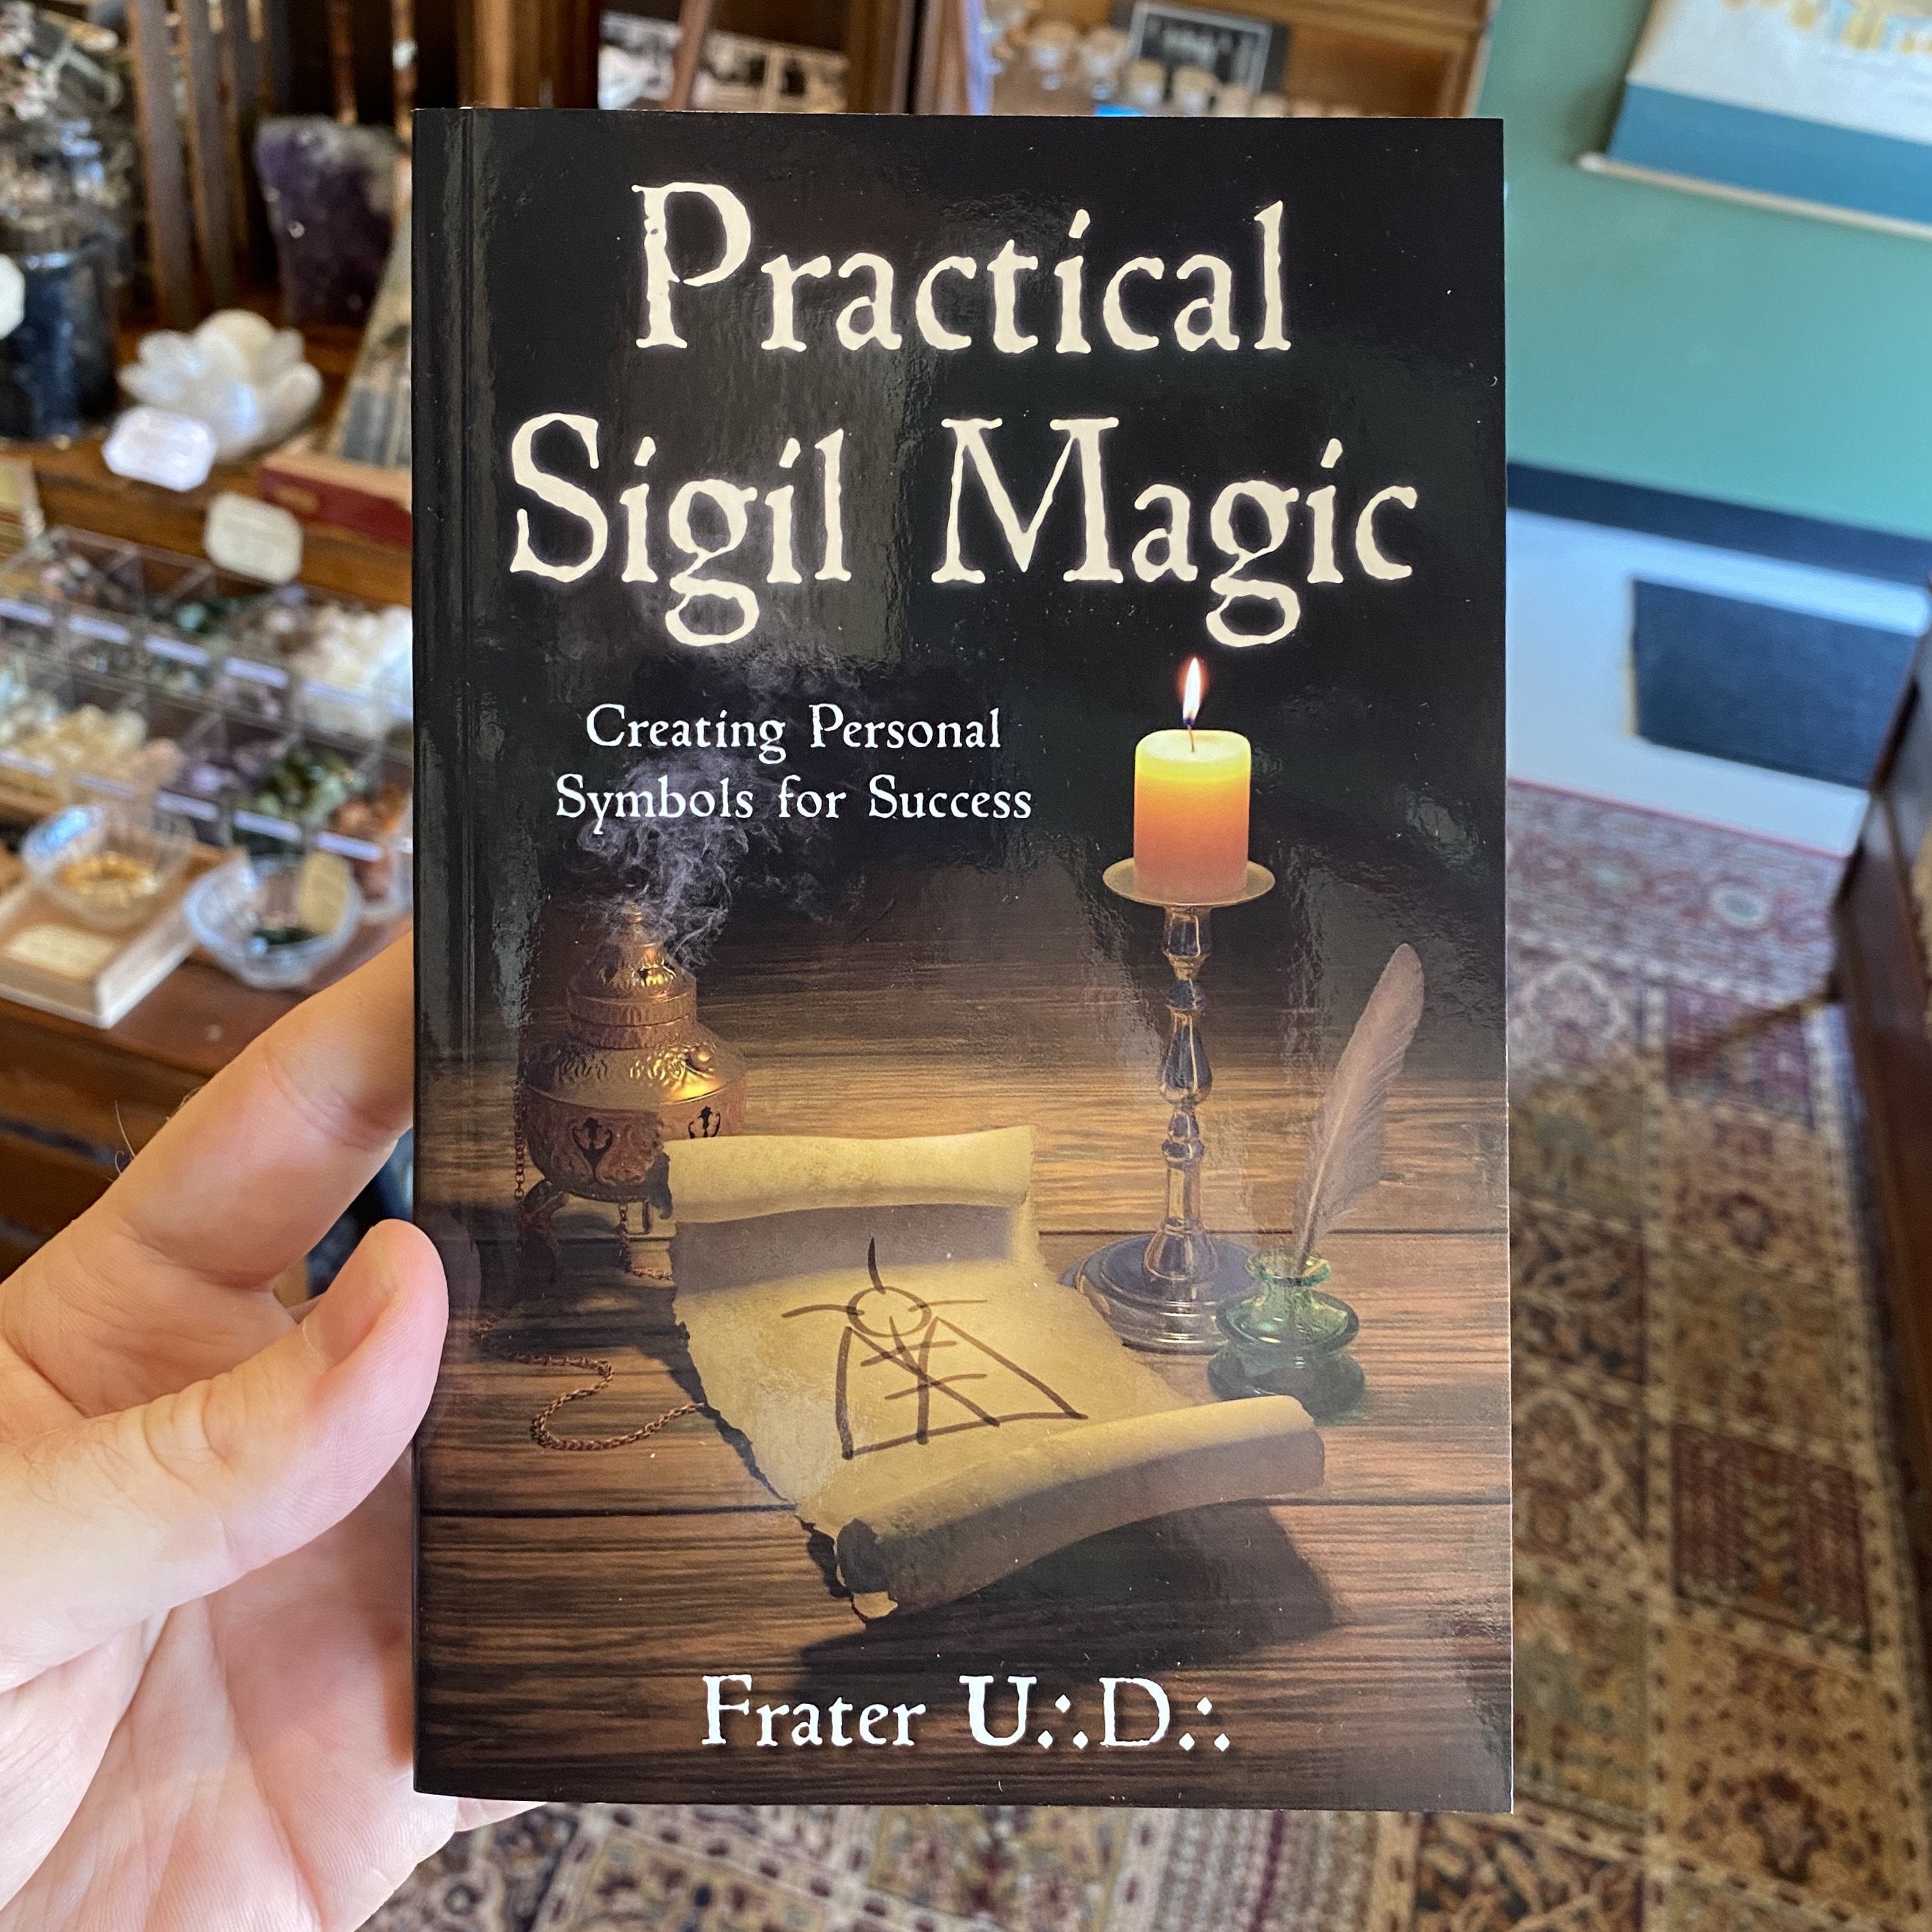 365 Days of Crystal Magic: Simple Practices with Gemstones & Minerals